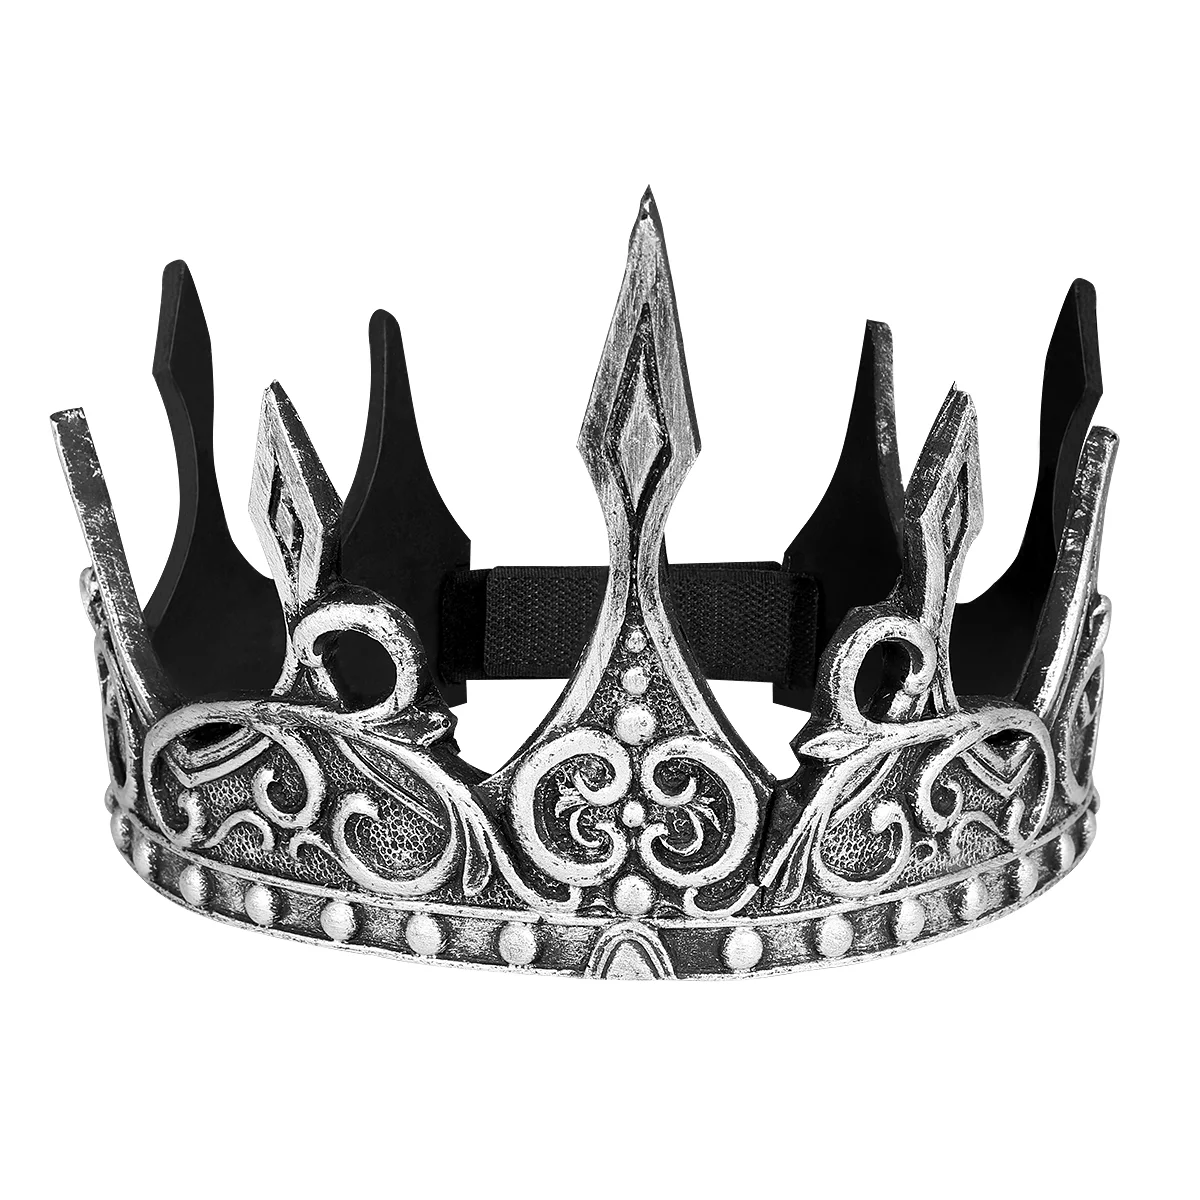 Kids Tiara Jubilee Crowns Adults Performance Props Goth Men Kings King Party Decoration Child Birthday King